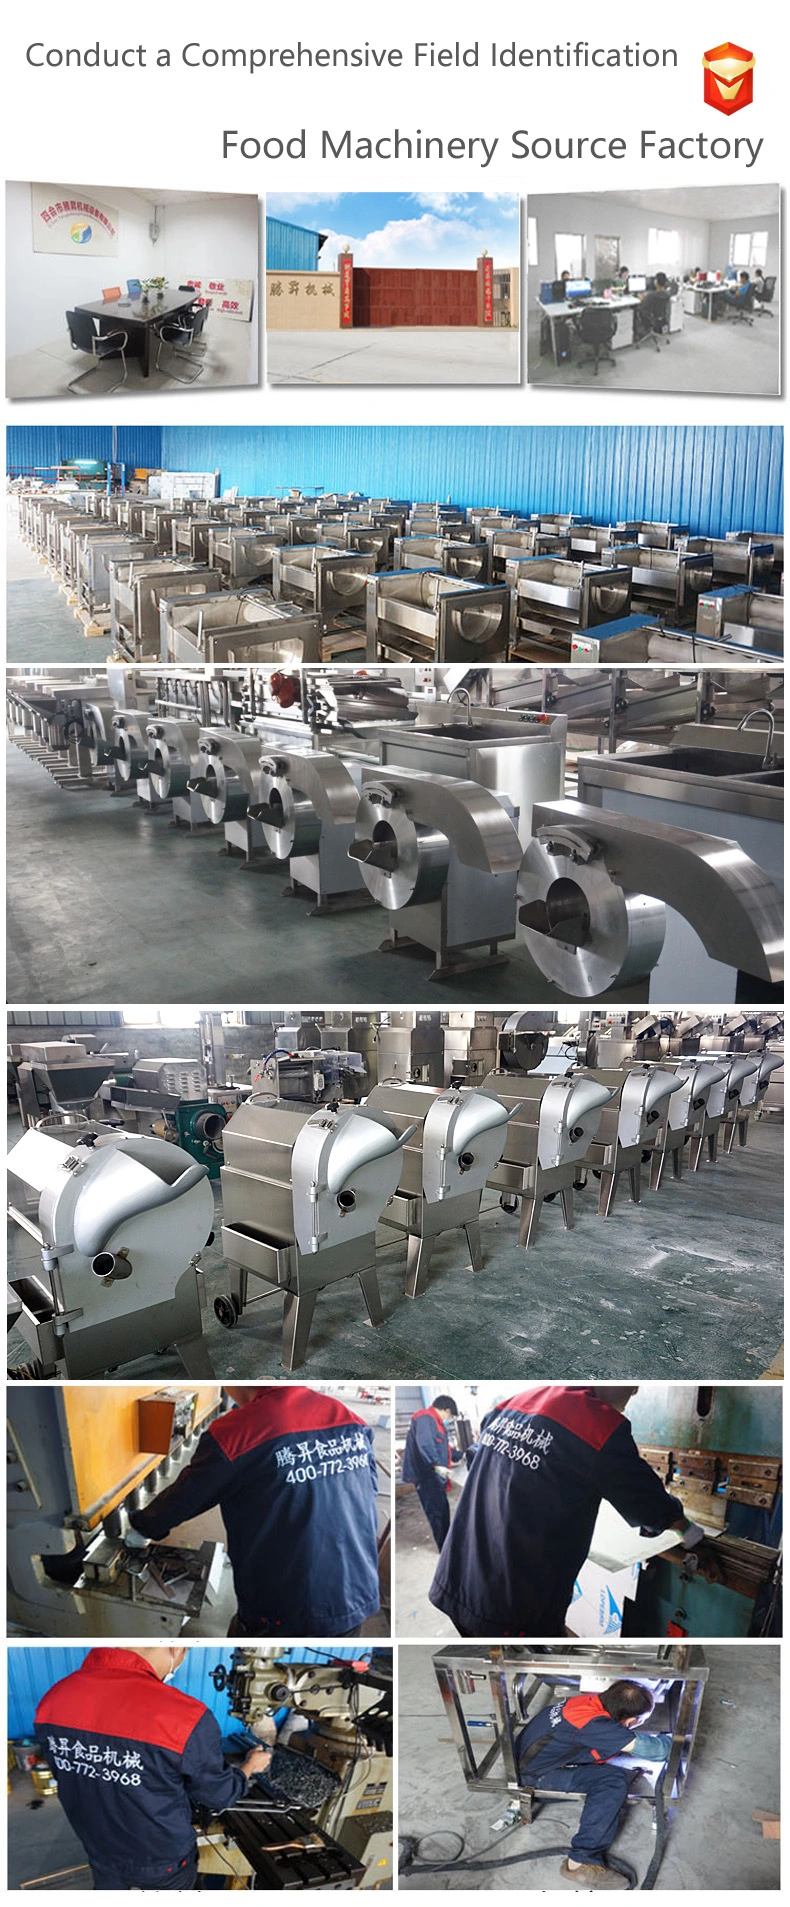 Electric Meat Processing Equipment Commercial Small Scale Pork Meat Cutting Machine (QX-30)